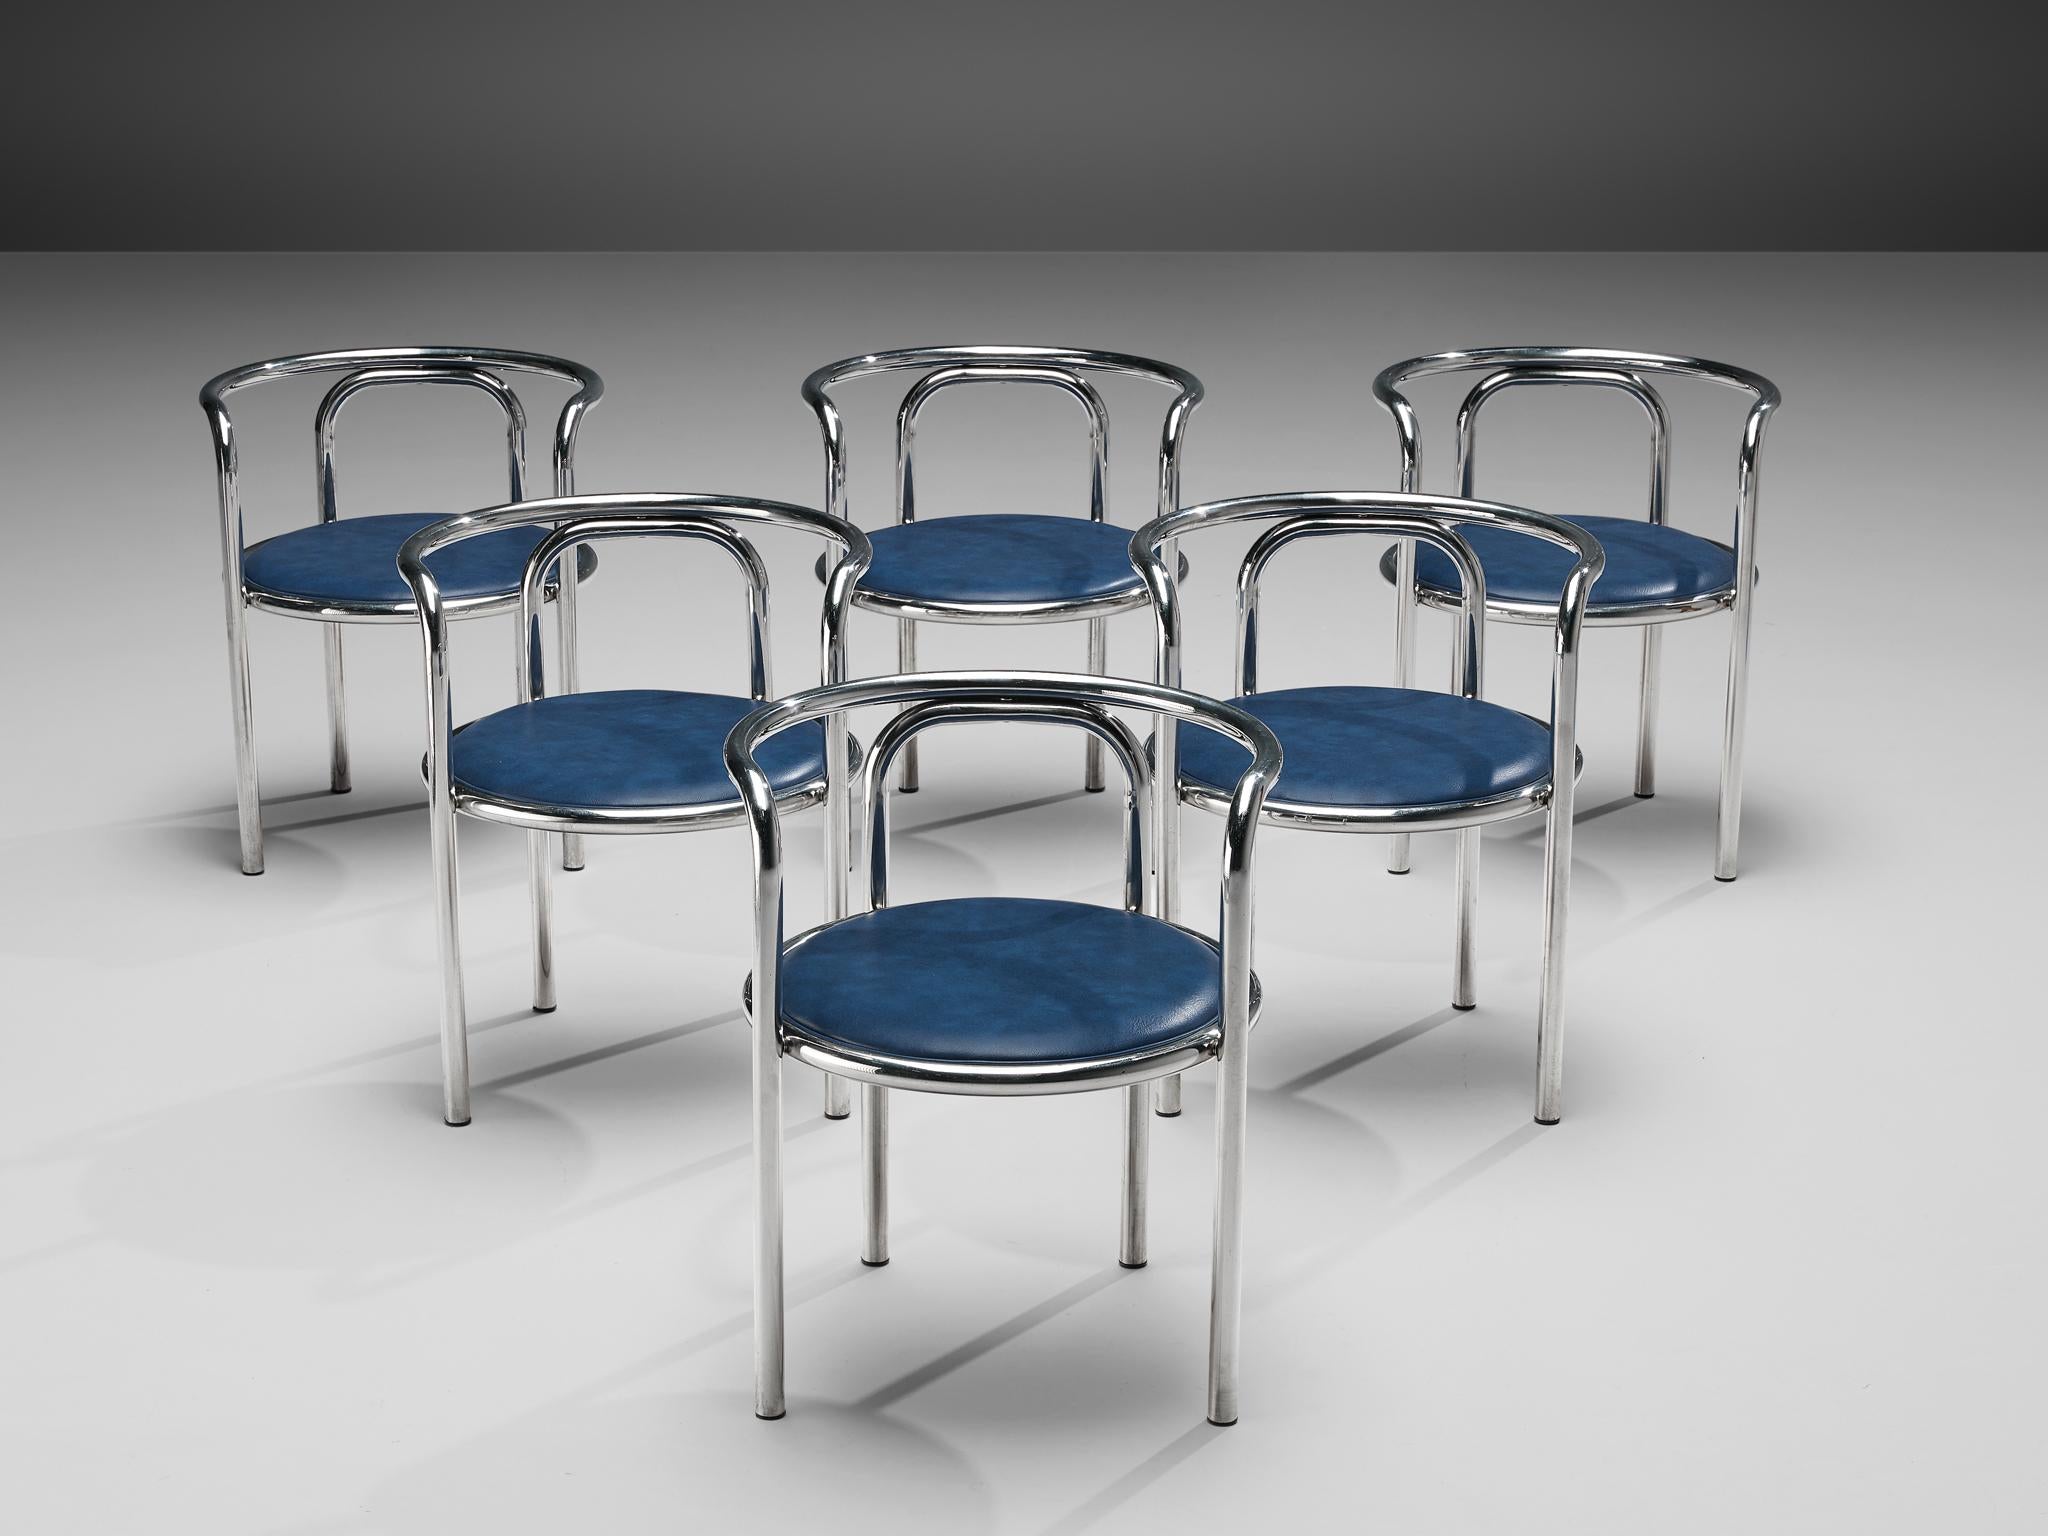 Gae Aulenti for Zanotta, 'Locus Solus' armchairs, chromed tubular steel, blue leatherette, Italy, 1964

Set of 'Locus Solus' armchairs. These armchairs, designed by Gae Aulenti and produced by Poltronova, are one of Aulenti’s most playful design